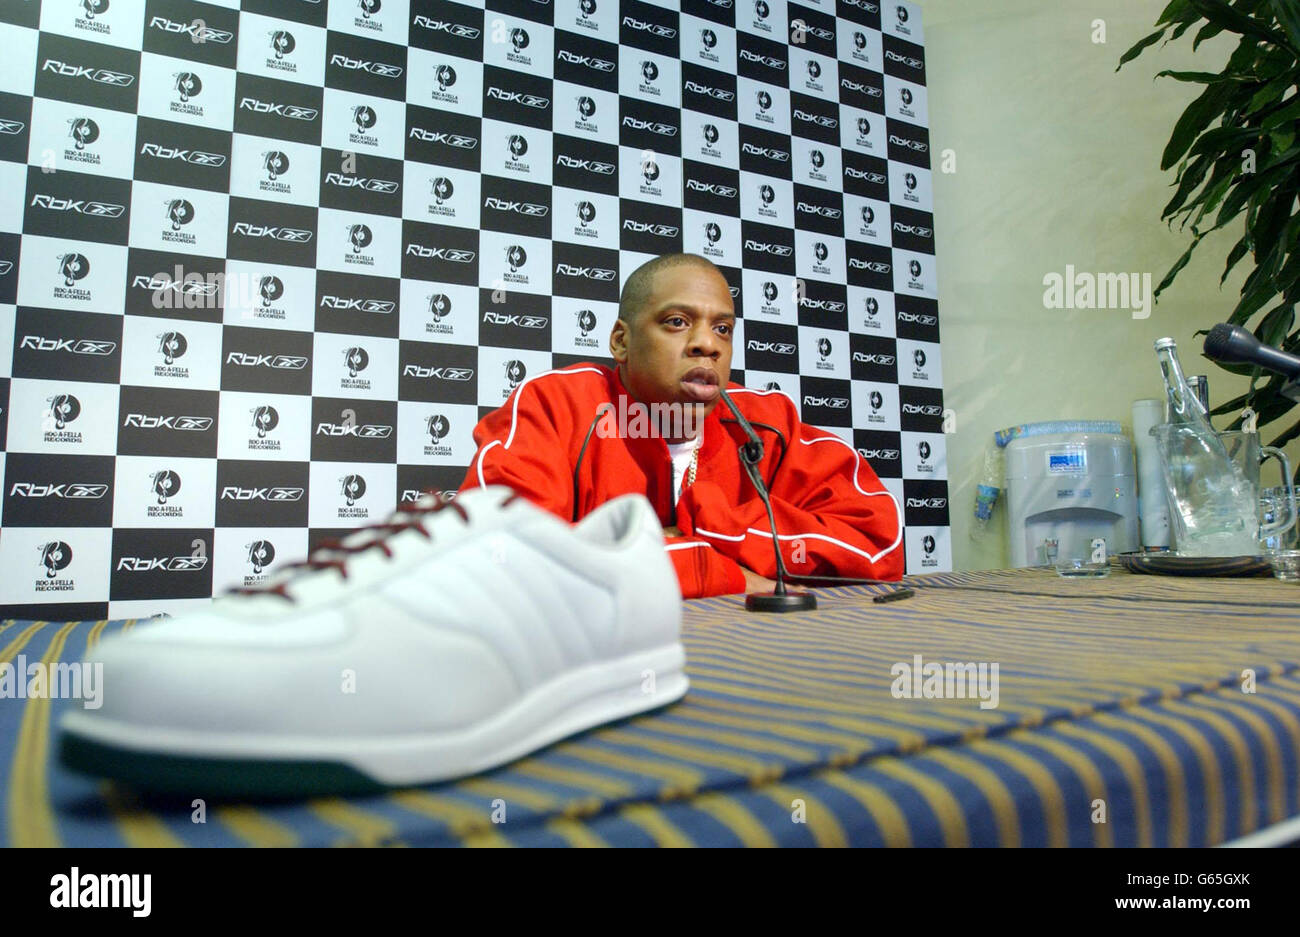 US rapper Jay-Z during a photocall at Stansted Airport, to launch a new  range of customised Reebok trainers, the S.Carter Collection Stock Photo -  Alamy